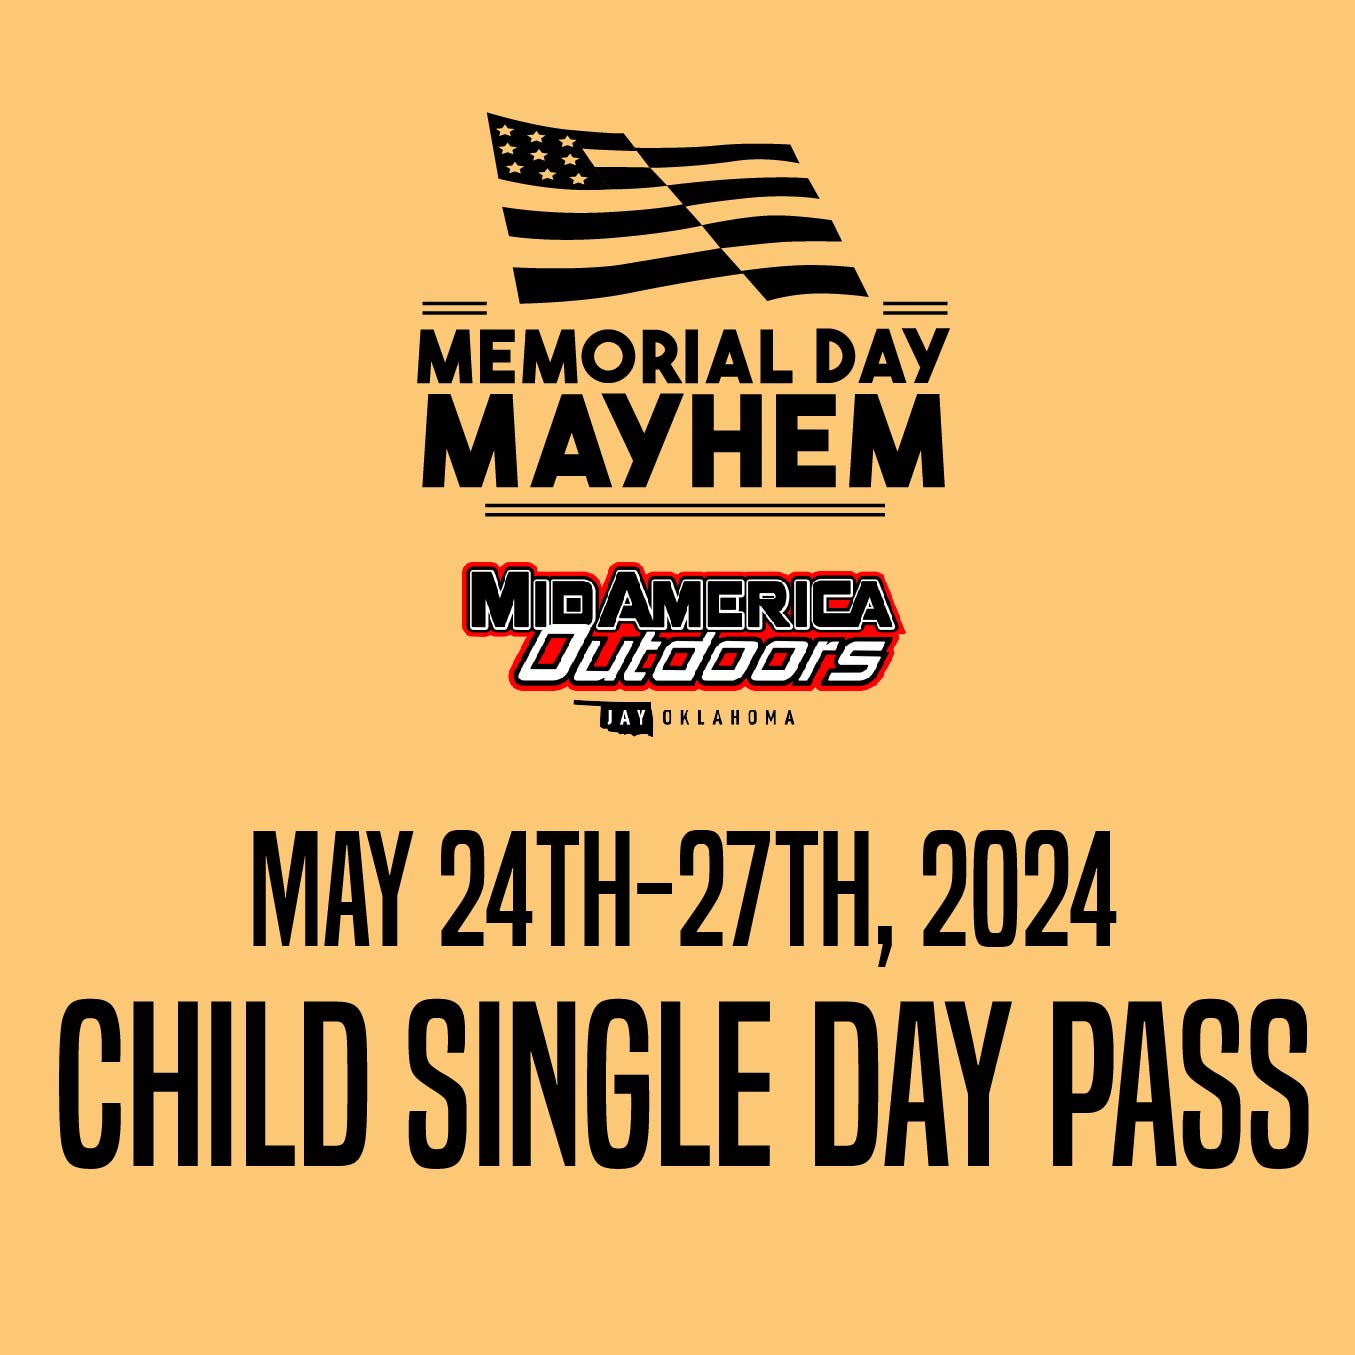 Child SINGLE DAY Pass -2024 Memorial Weekend May 23rd-27th